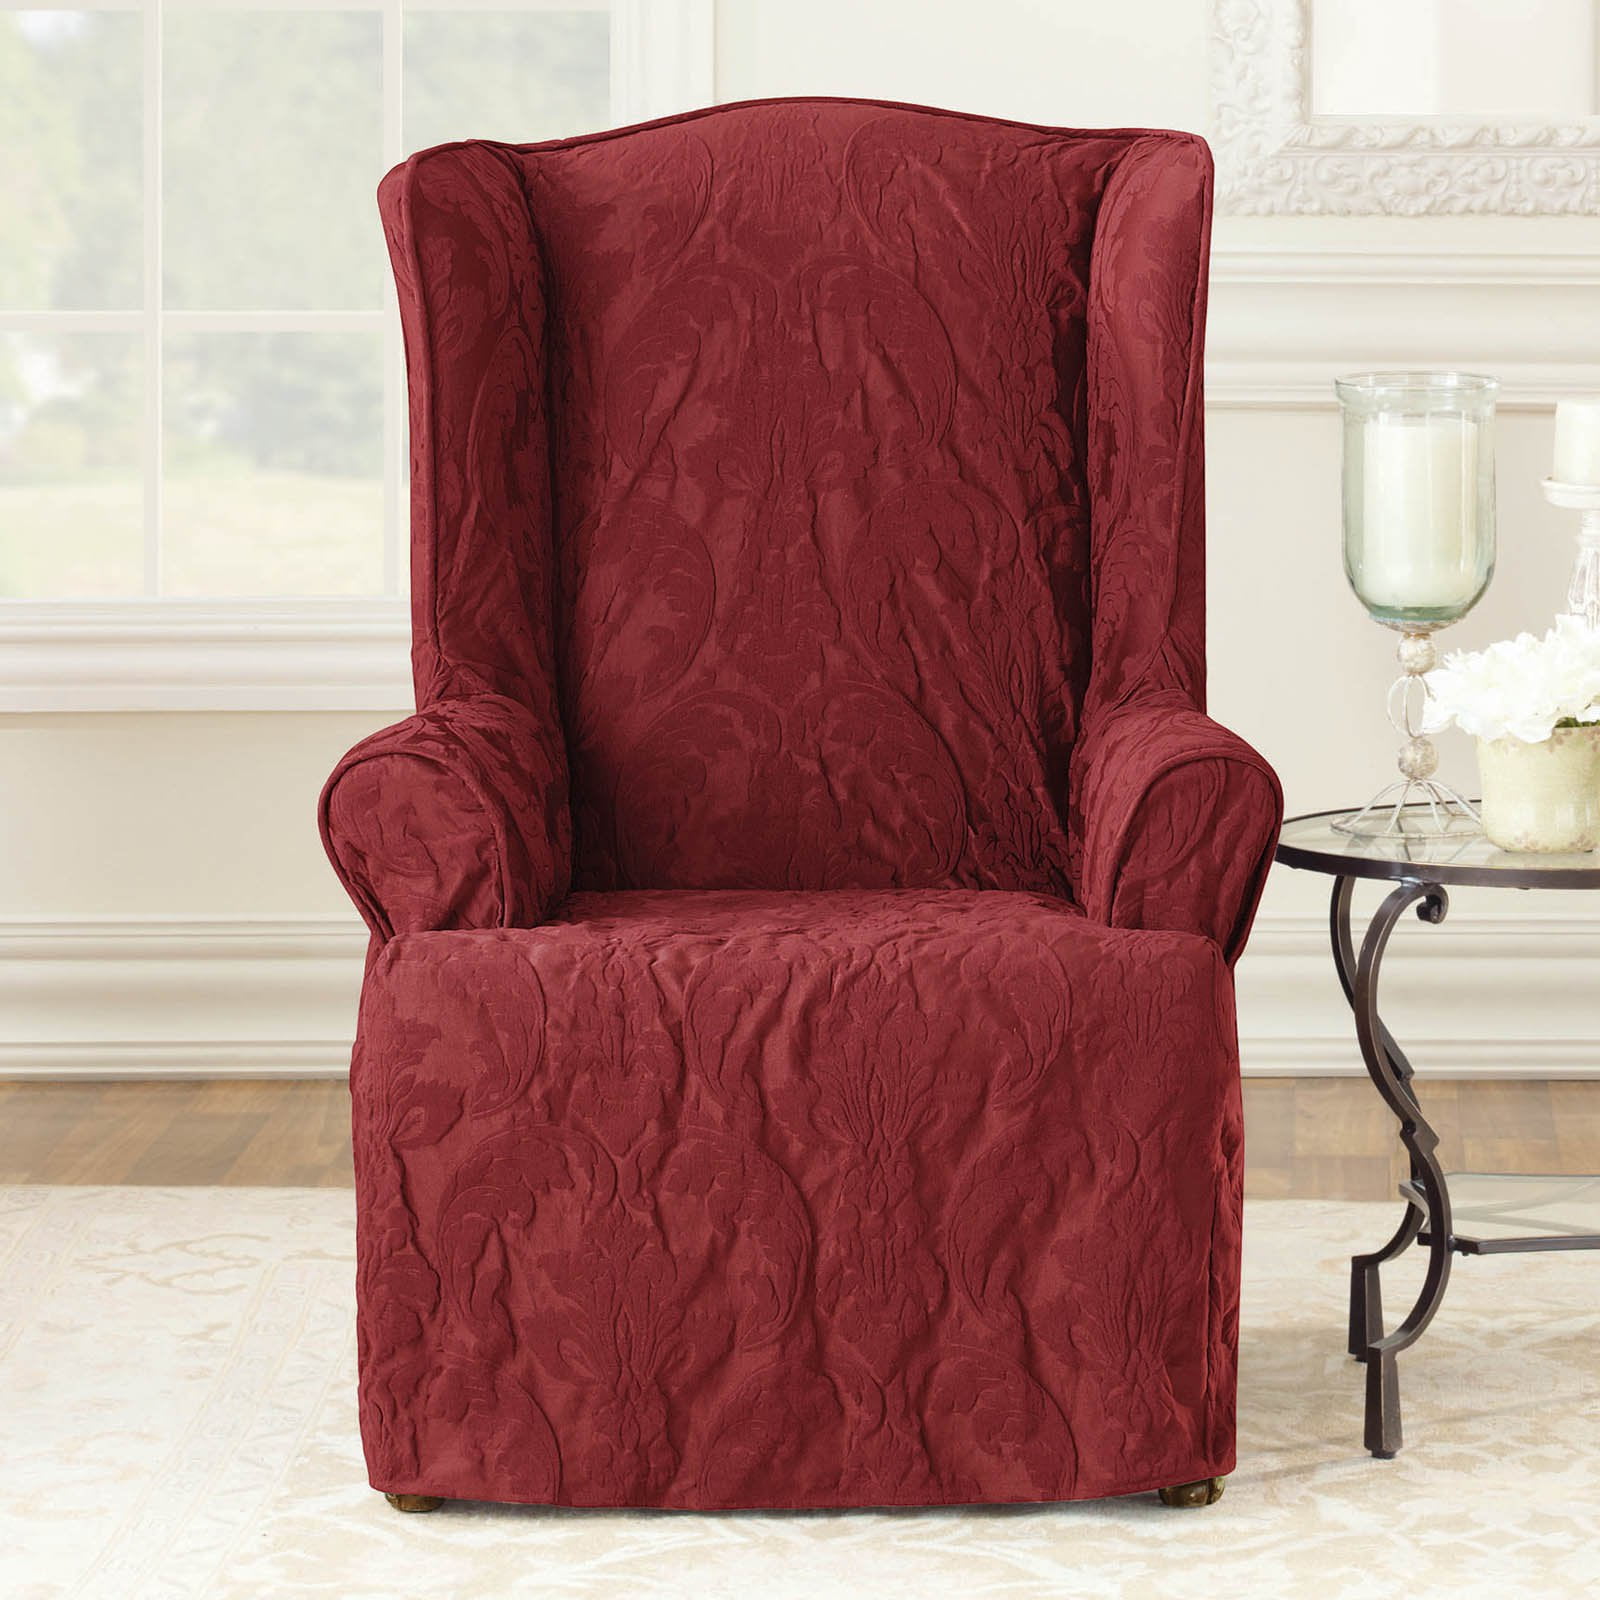 Creatice Wingback Chair Slipcovers Walmart for Large Space